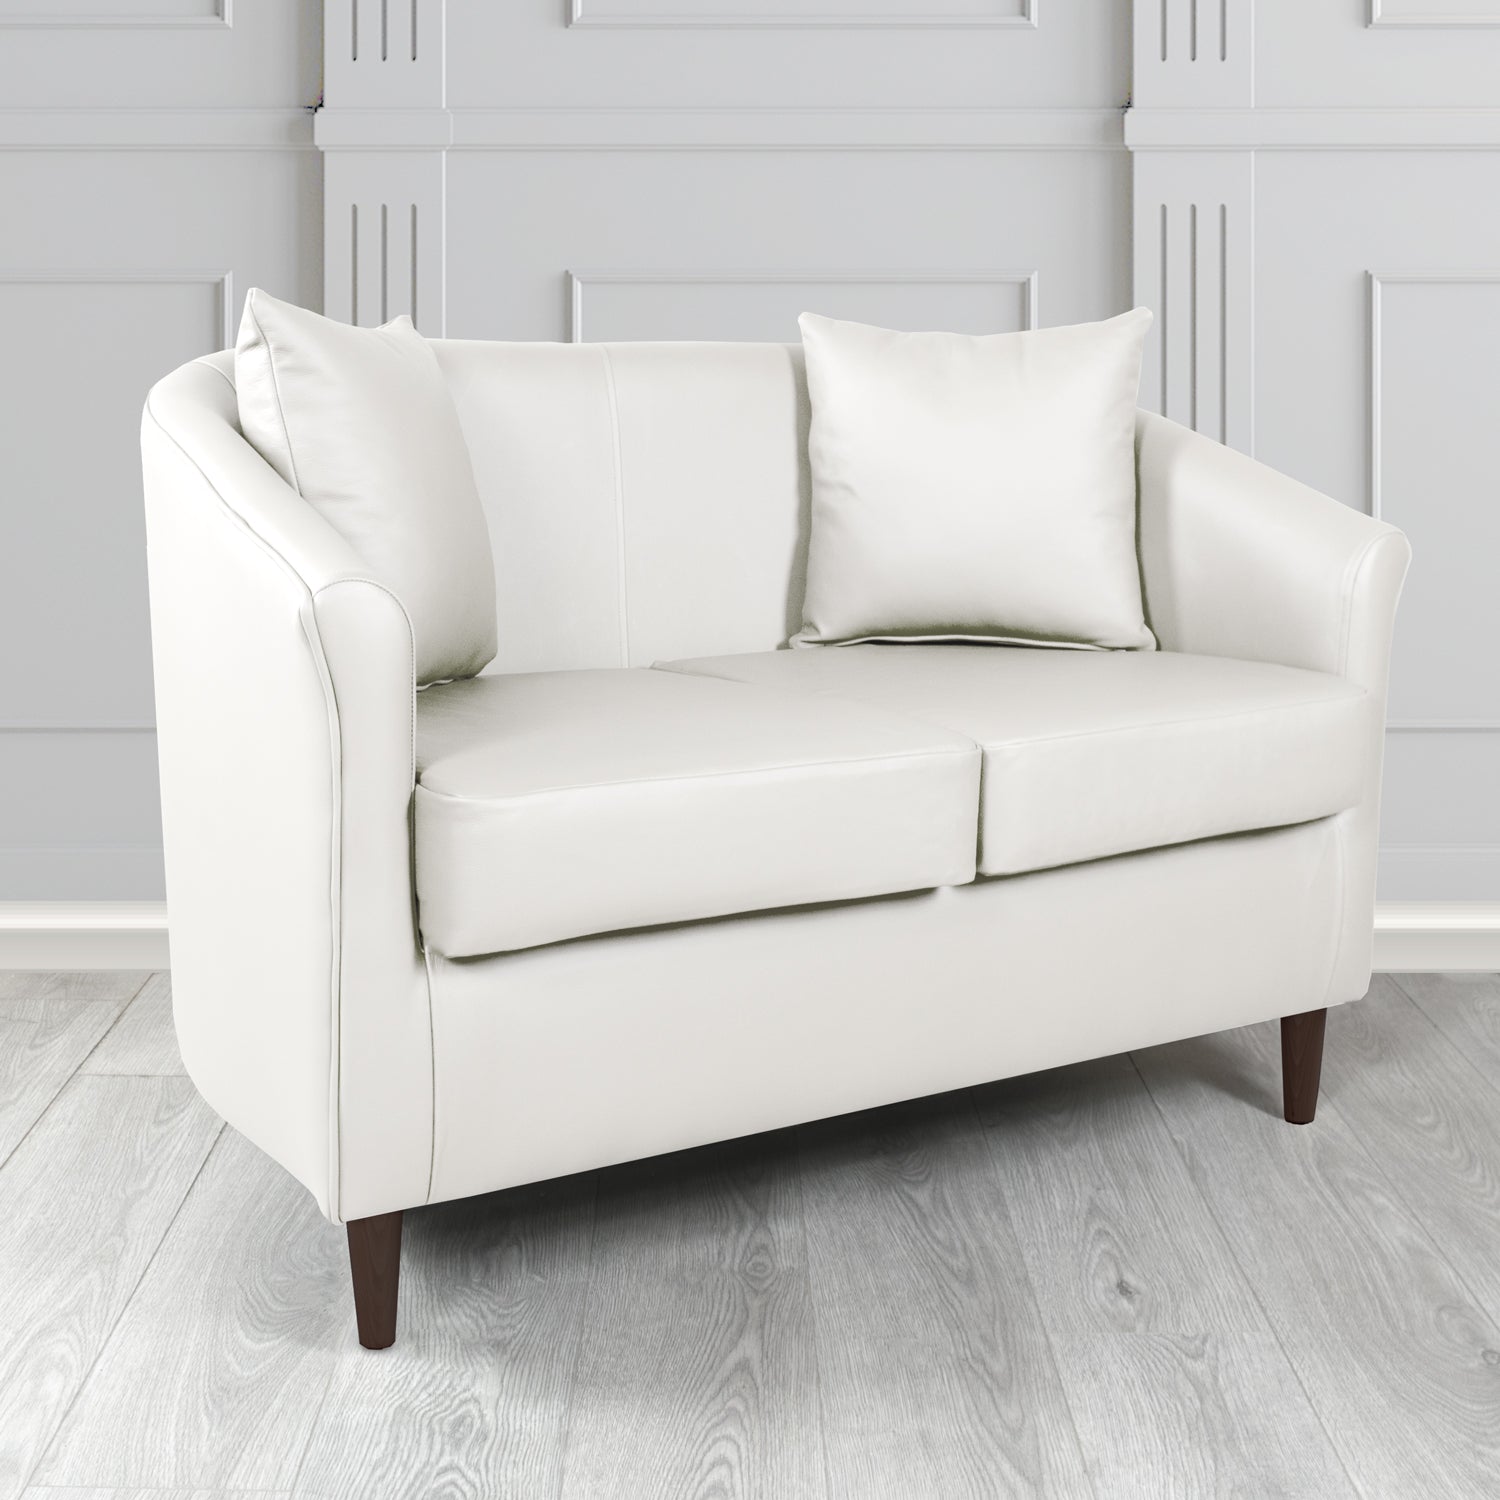 St Tropez 2 Seater Tub Sofa in Madrid White Faux Leather - The Tub Chair Shop